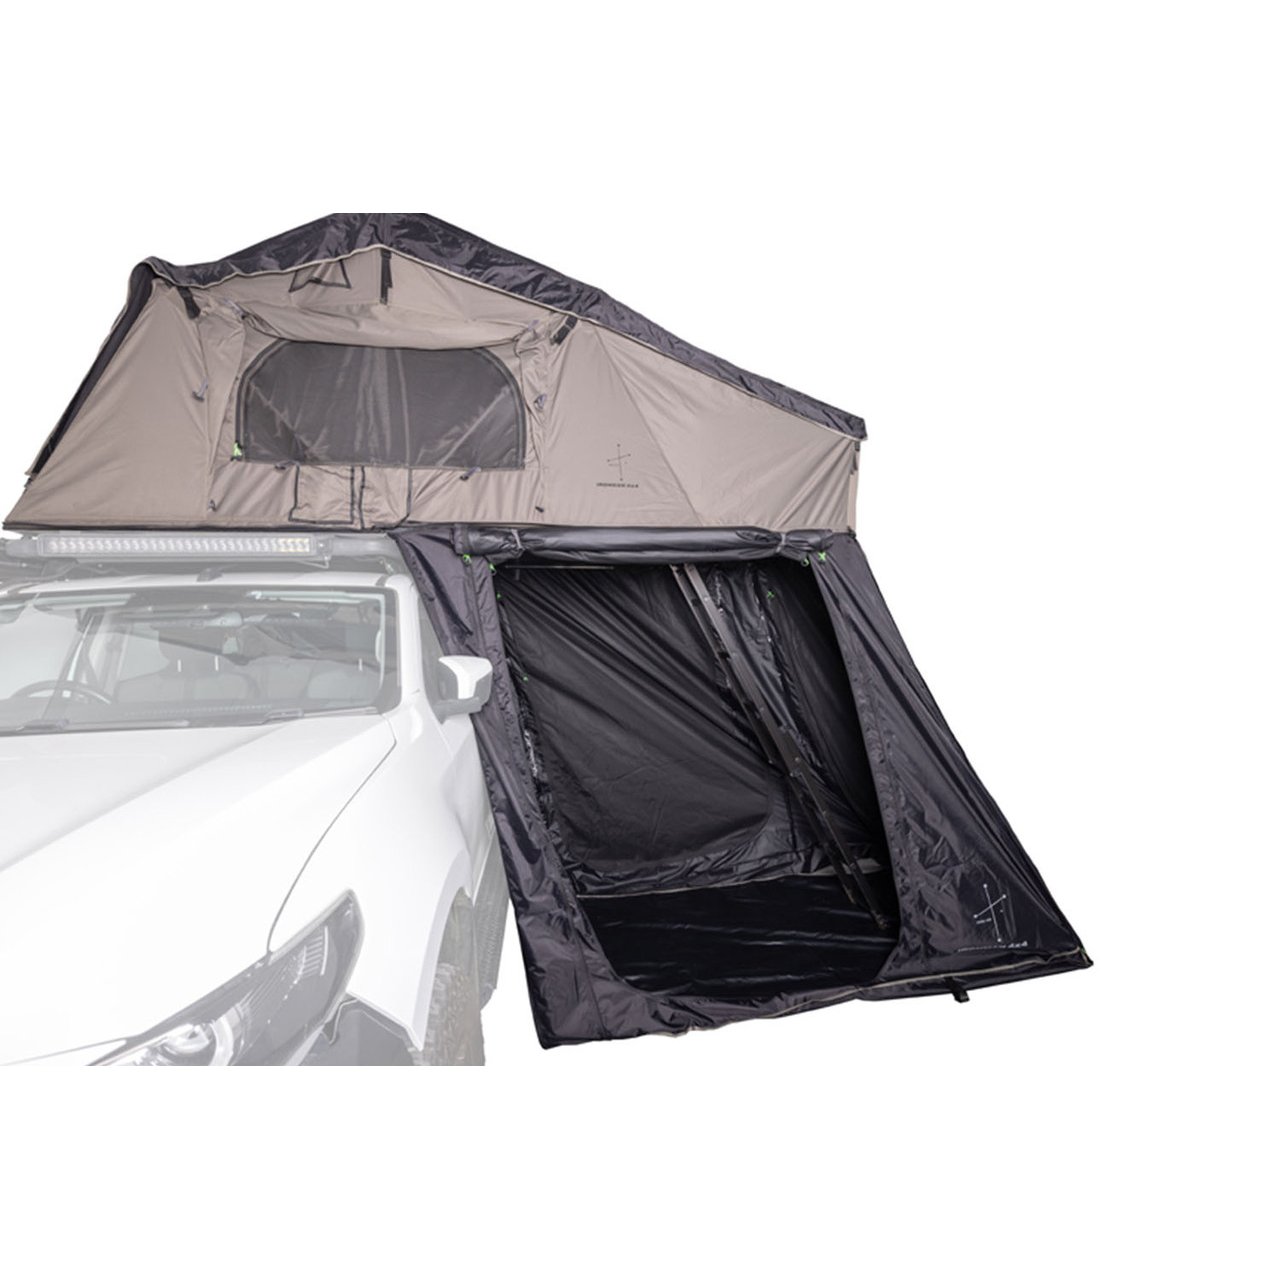 ANNEX ROOM FOR CROSS 1200 ROOFTOP TENT